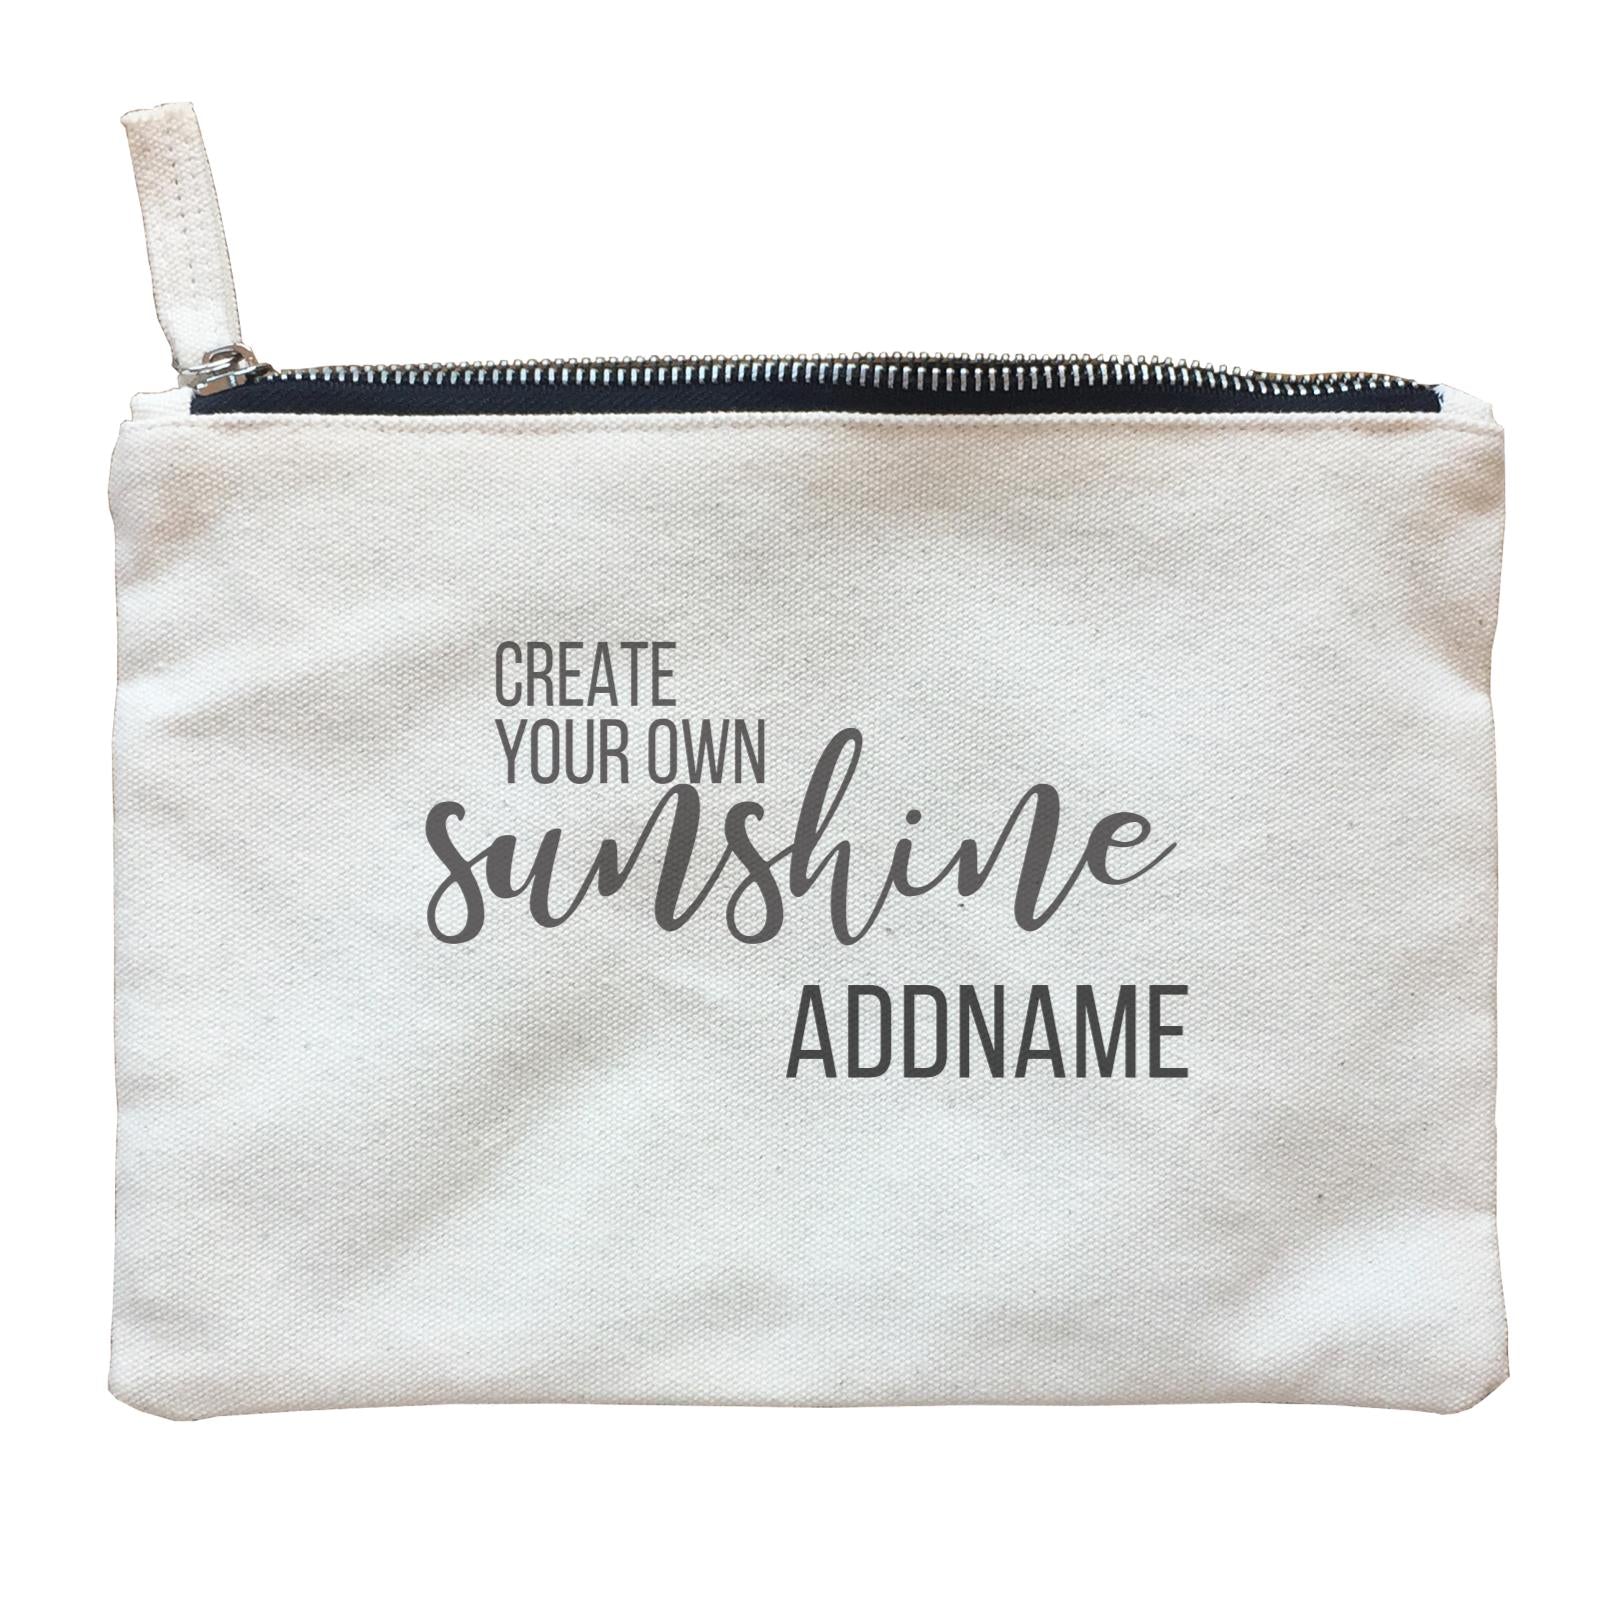 Inspiration Quotes Create Your Own Sunshine Addname Zipper Pouch